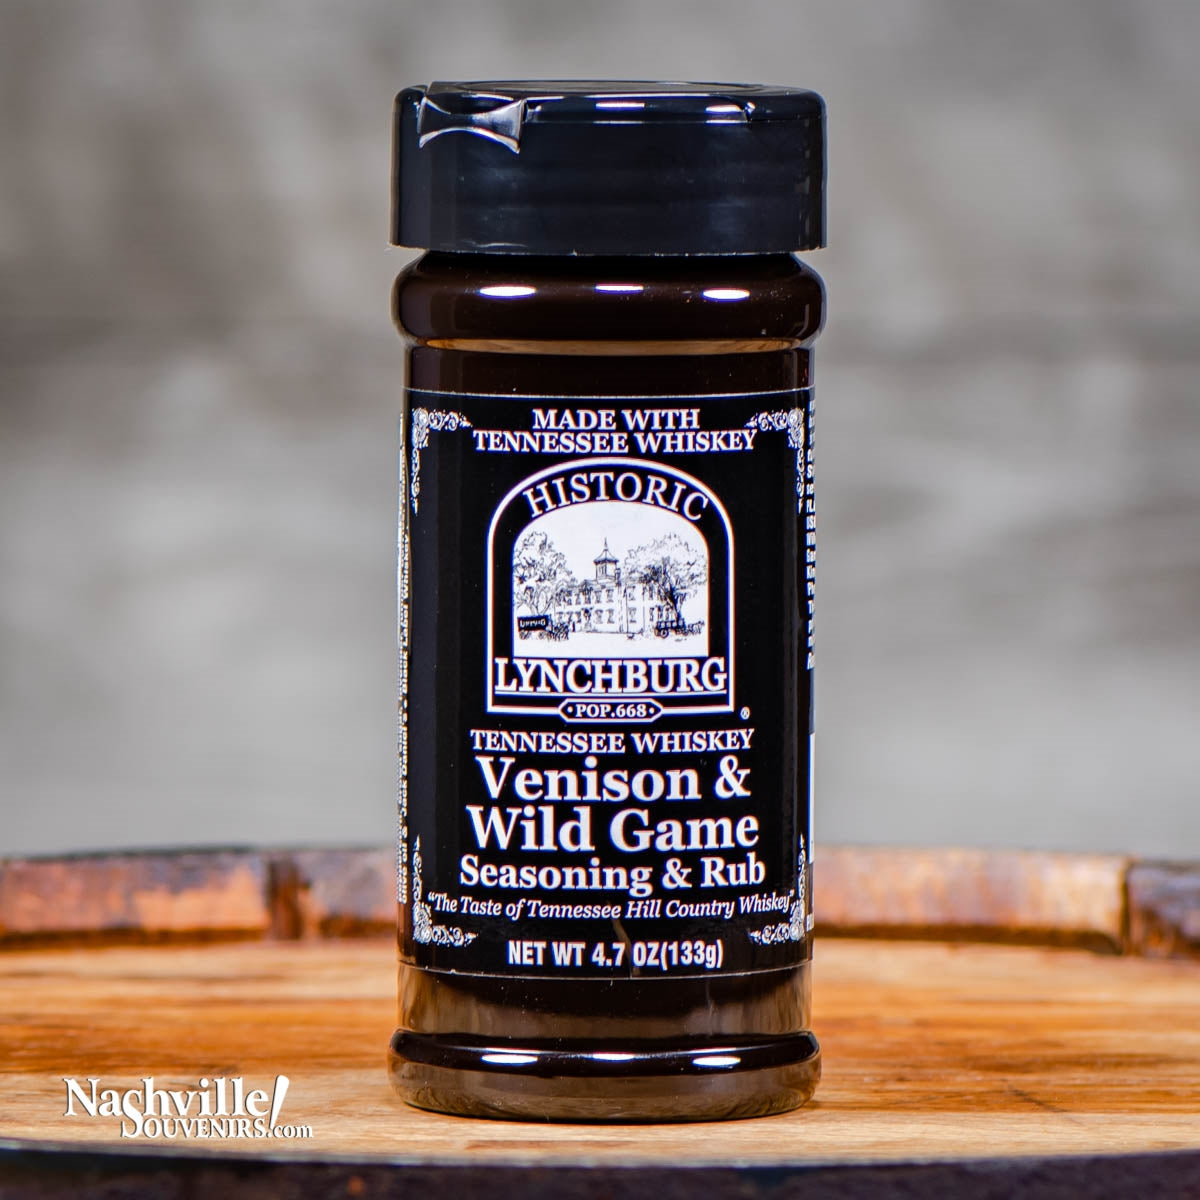 Buy Historic Lynchburg Venison & Wild Game Seasoning containing real Jack Daniels Tennessee whiskey.  FREE SHIPPING on all US orders over $75!